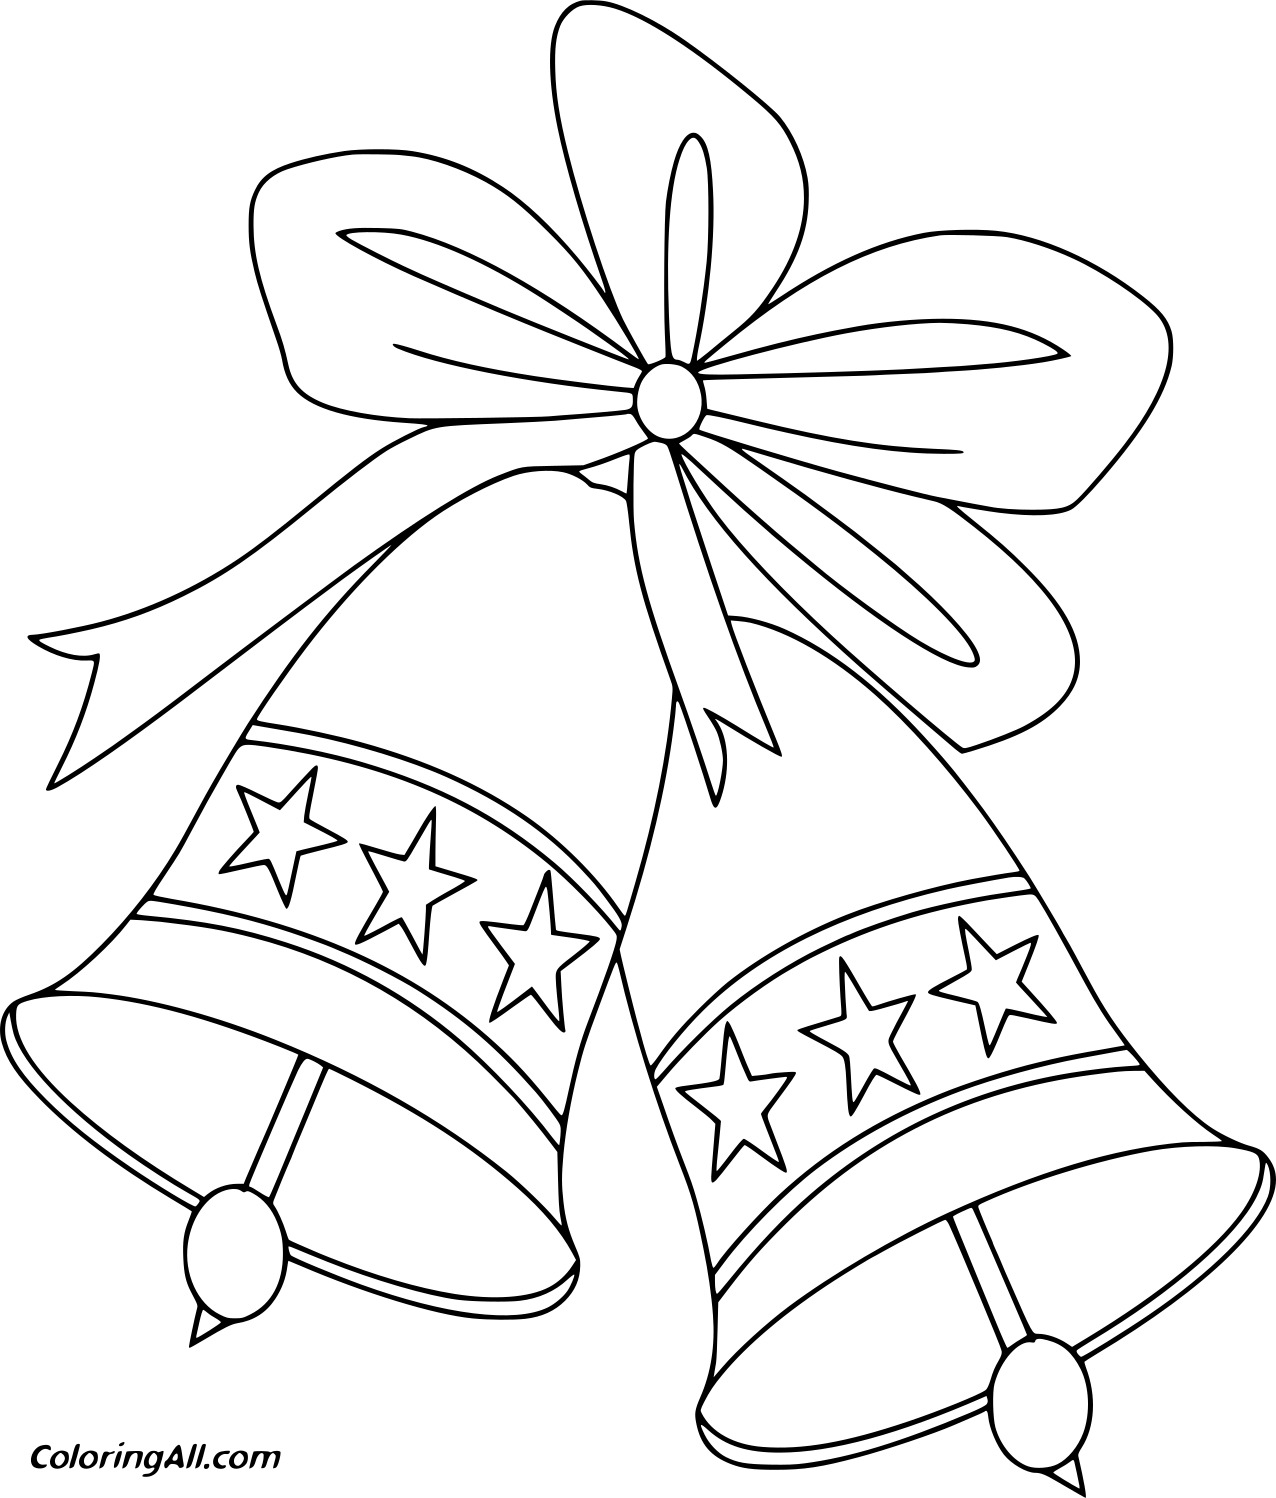 Bells With Three Stars Pattern Image For Kids Coloring Page